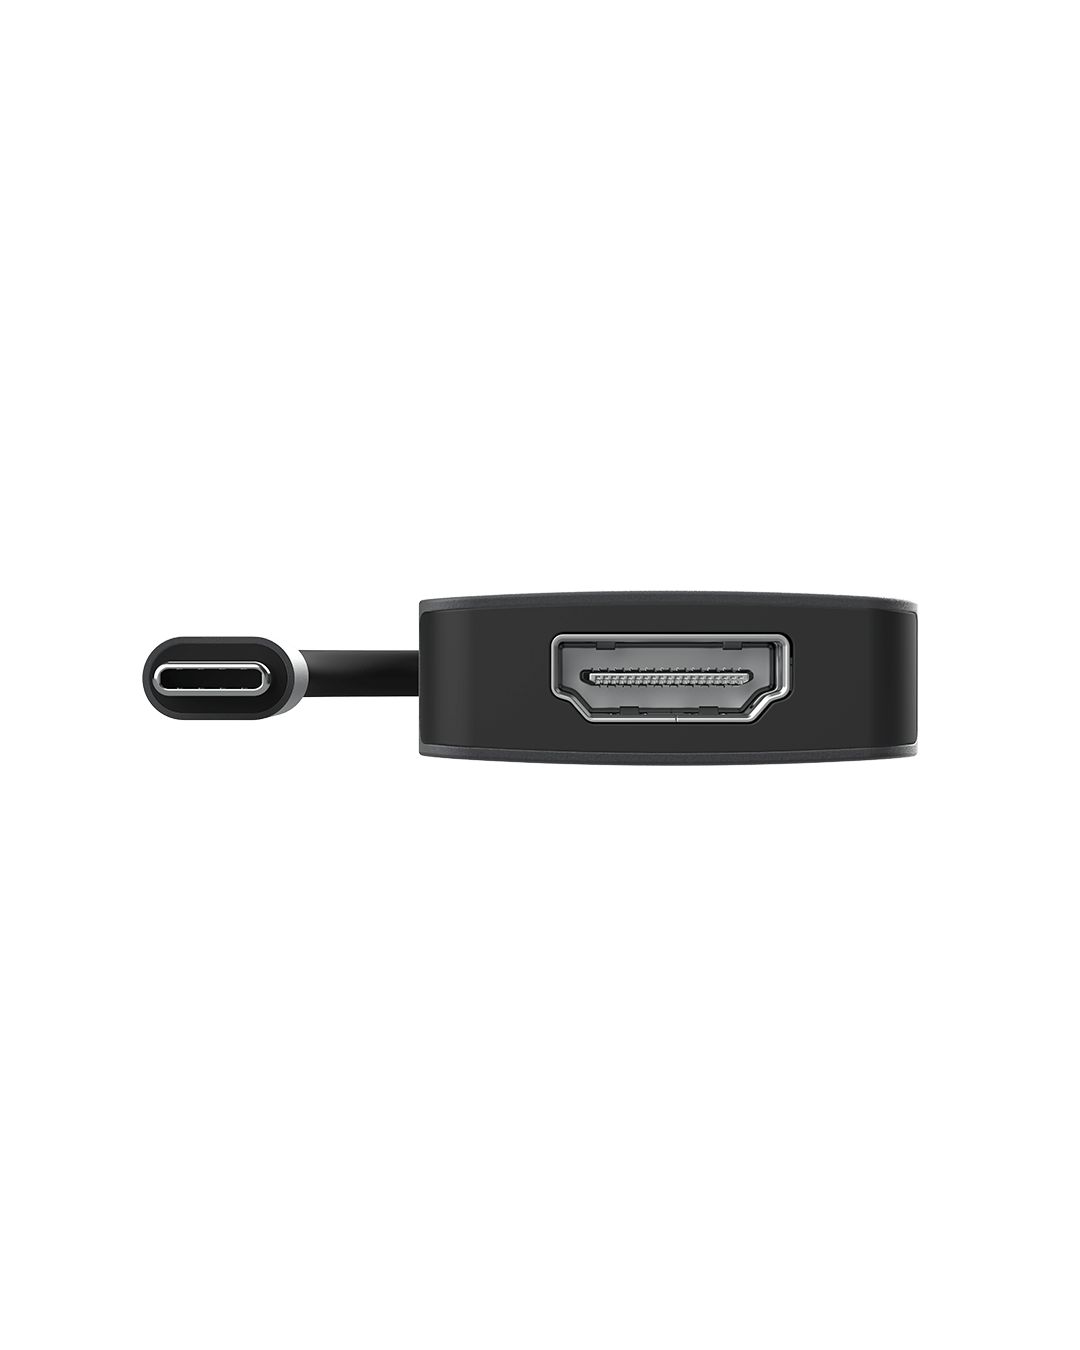 Sitecom - 5 in 1 USB-C Power Delivery Multiport Adapter - CN-5502